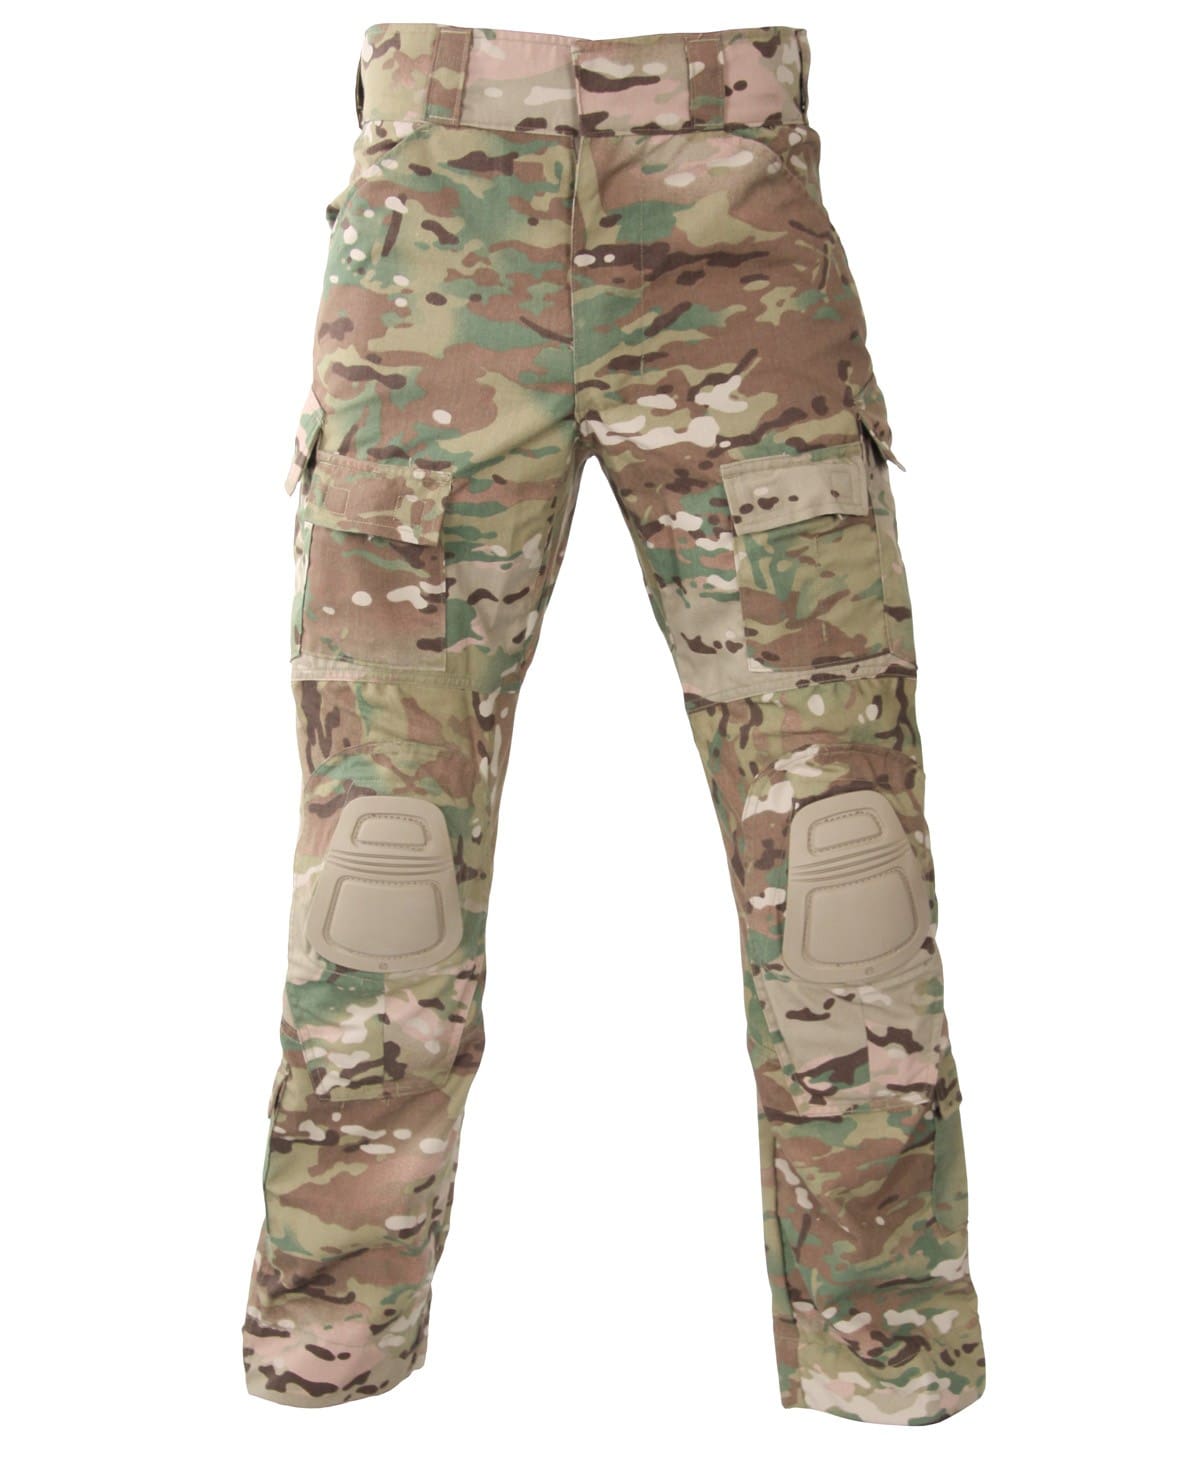 Propper Adds Army Combat Pant to Online Catalog | Soldier Systems Daily ...